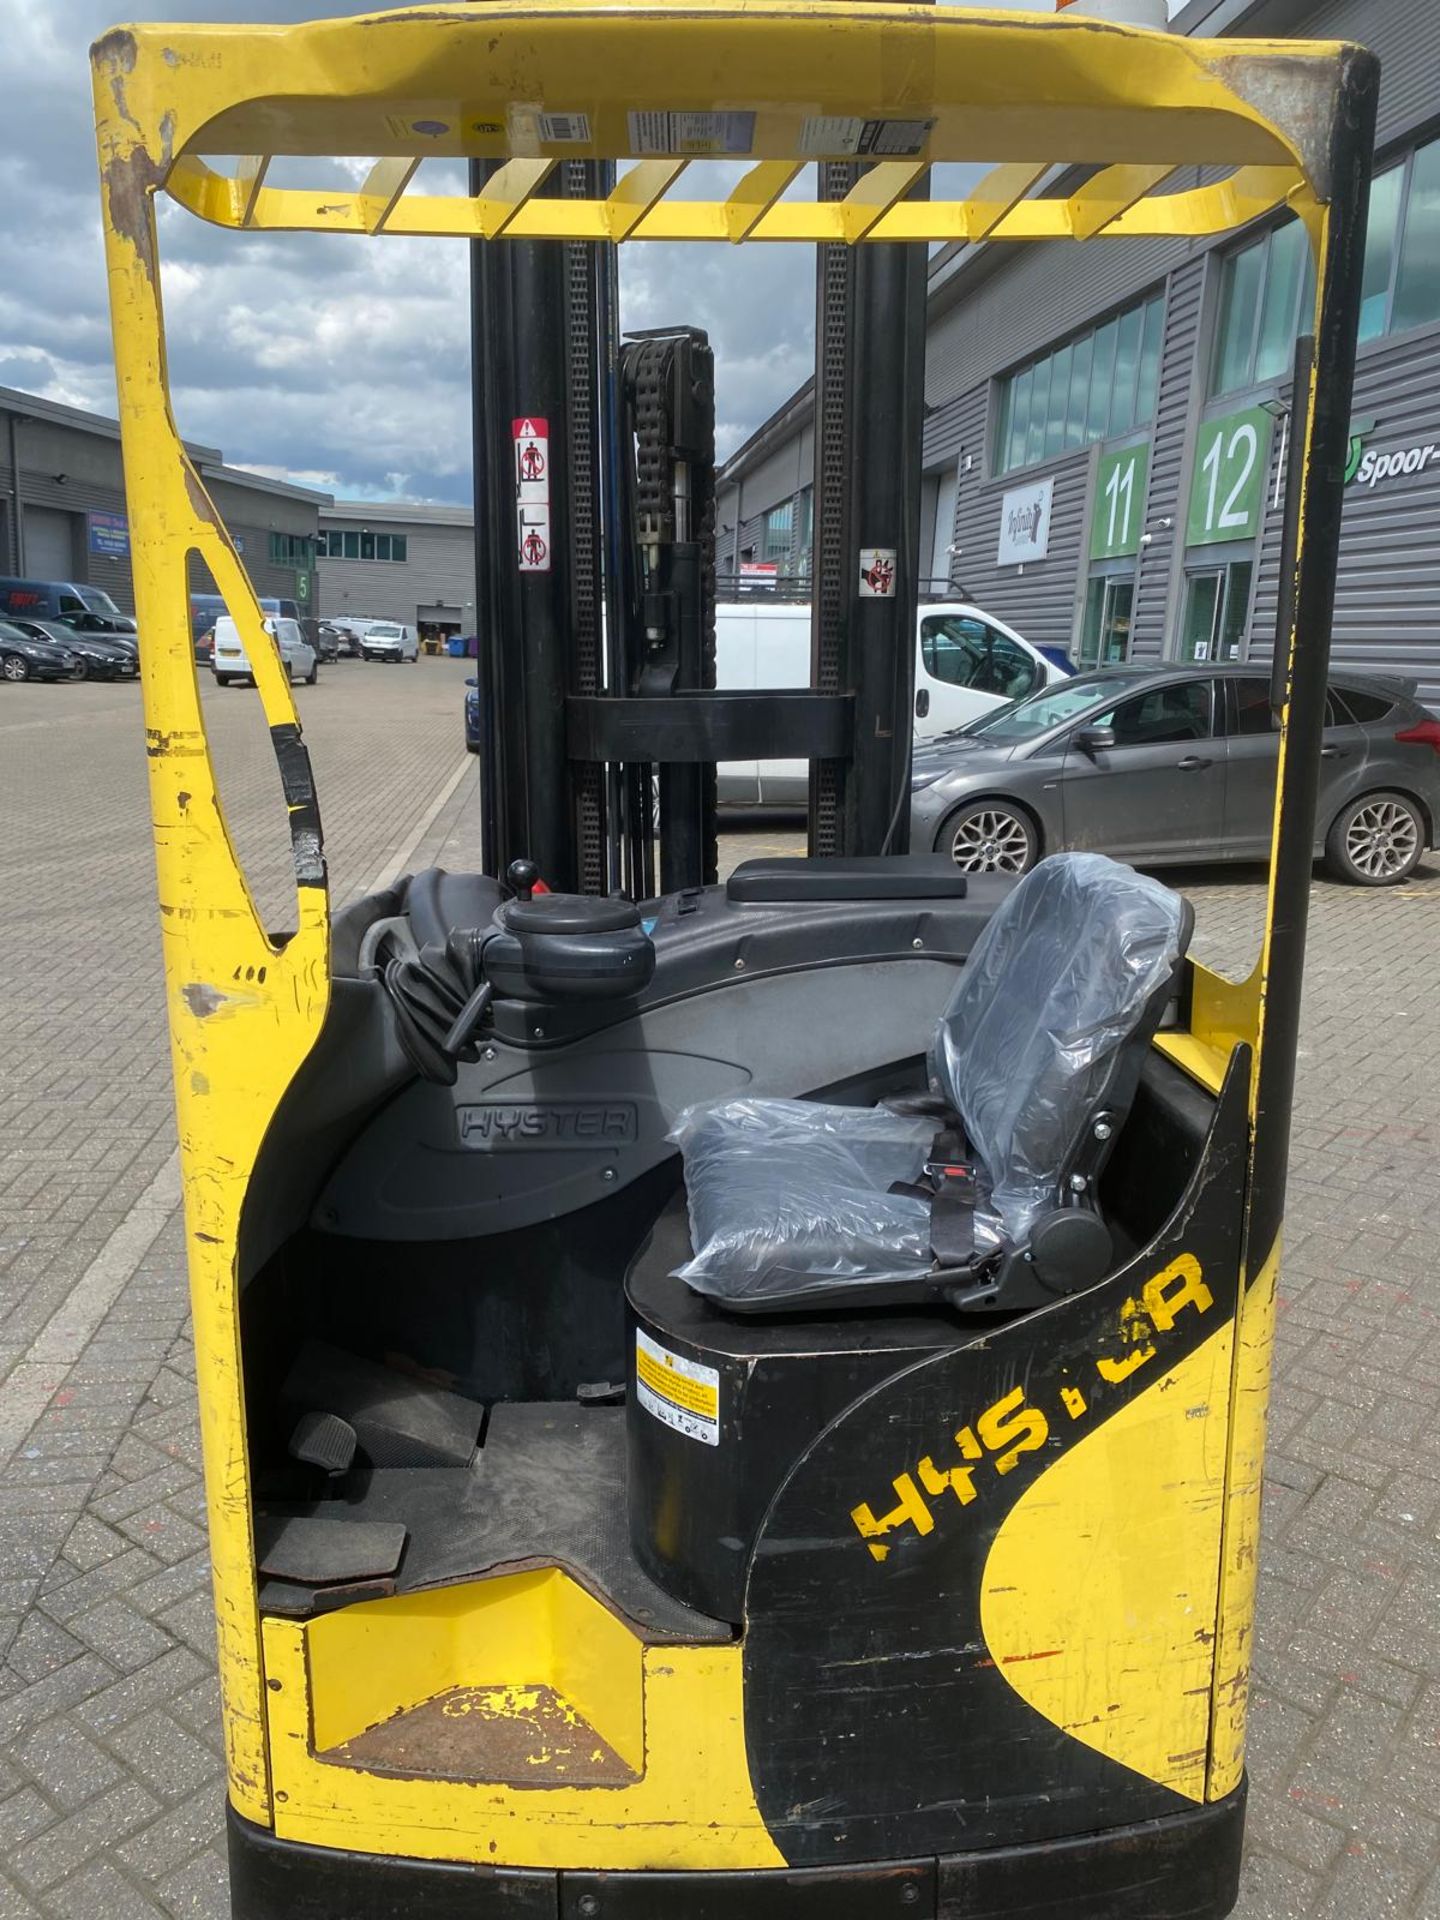 Hyster Forklift Reach Truck - Year: 2007 - 1,400kg Capacity - 8.5m Lift Height - Includes Charger - Image 3 of 10